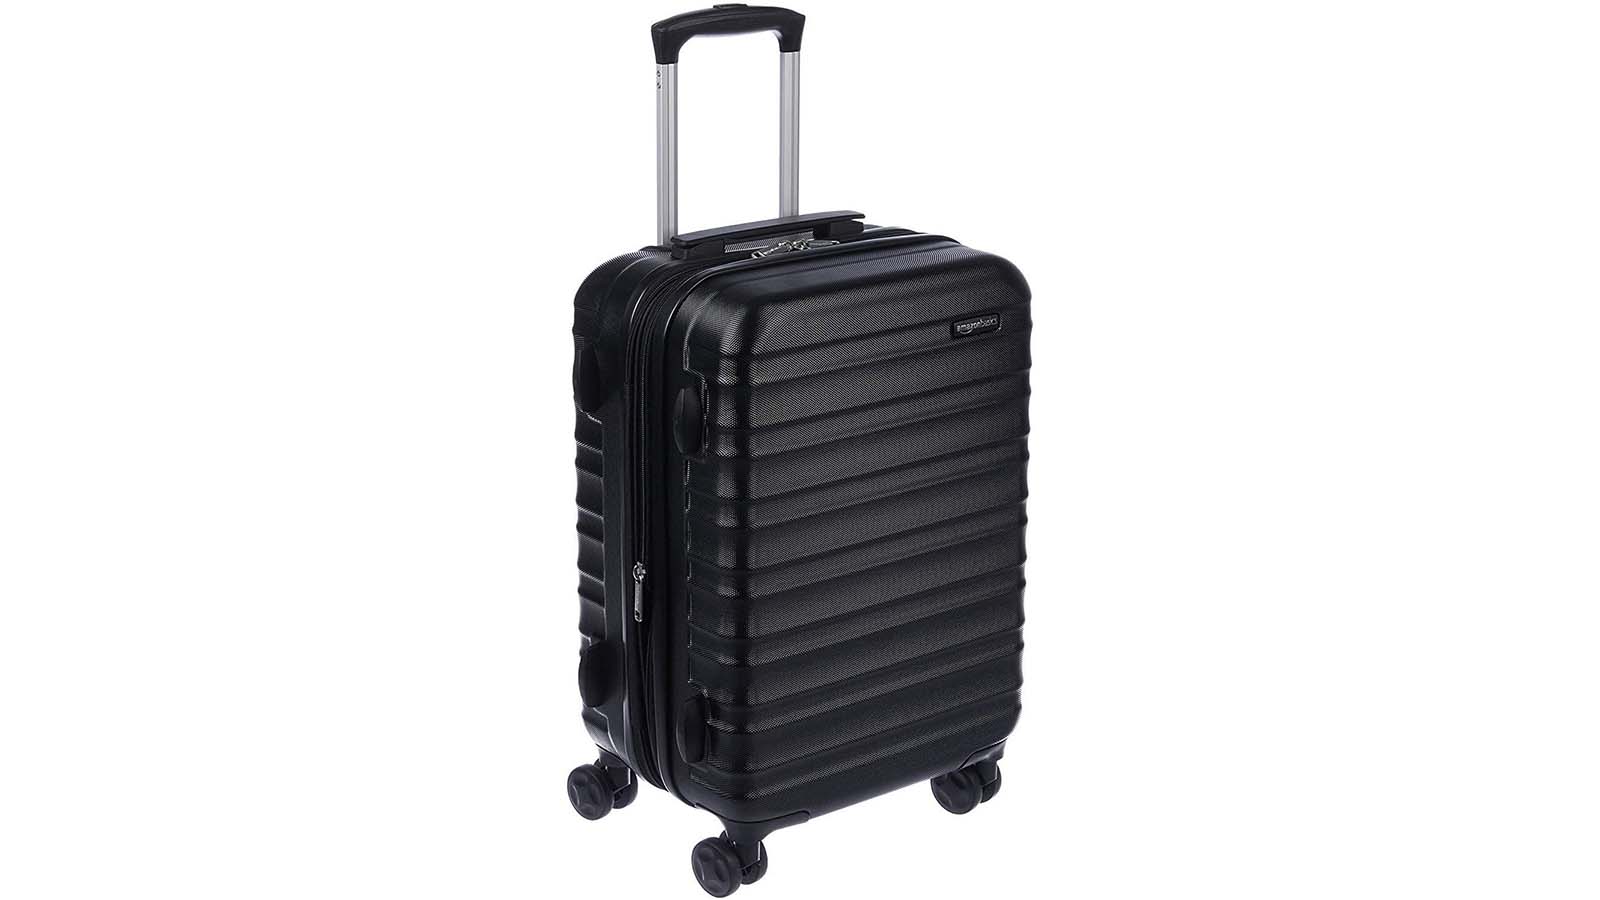 What is the standard size for carry-on luggage?